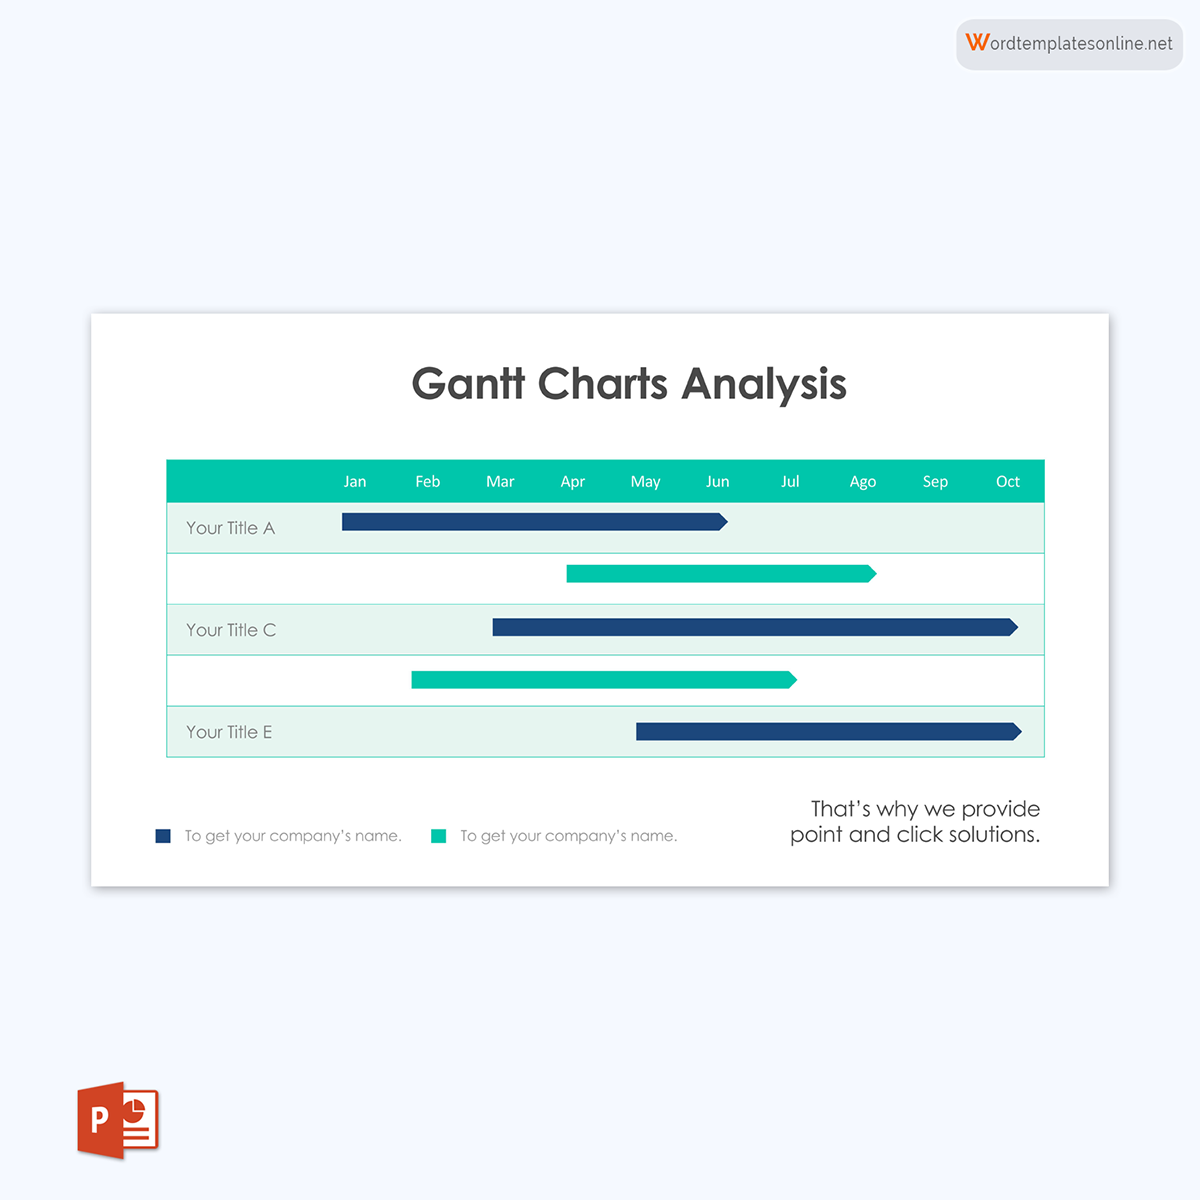 Great Fillable Yearly Gantt Chart Analysis Template 02 as PowerPoint Slides